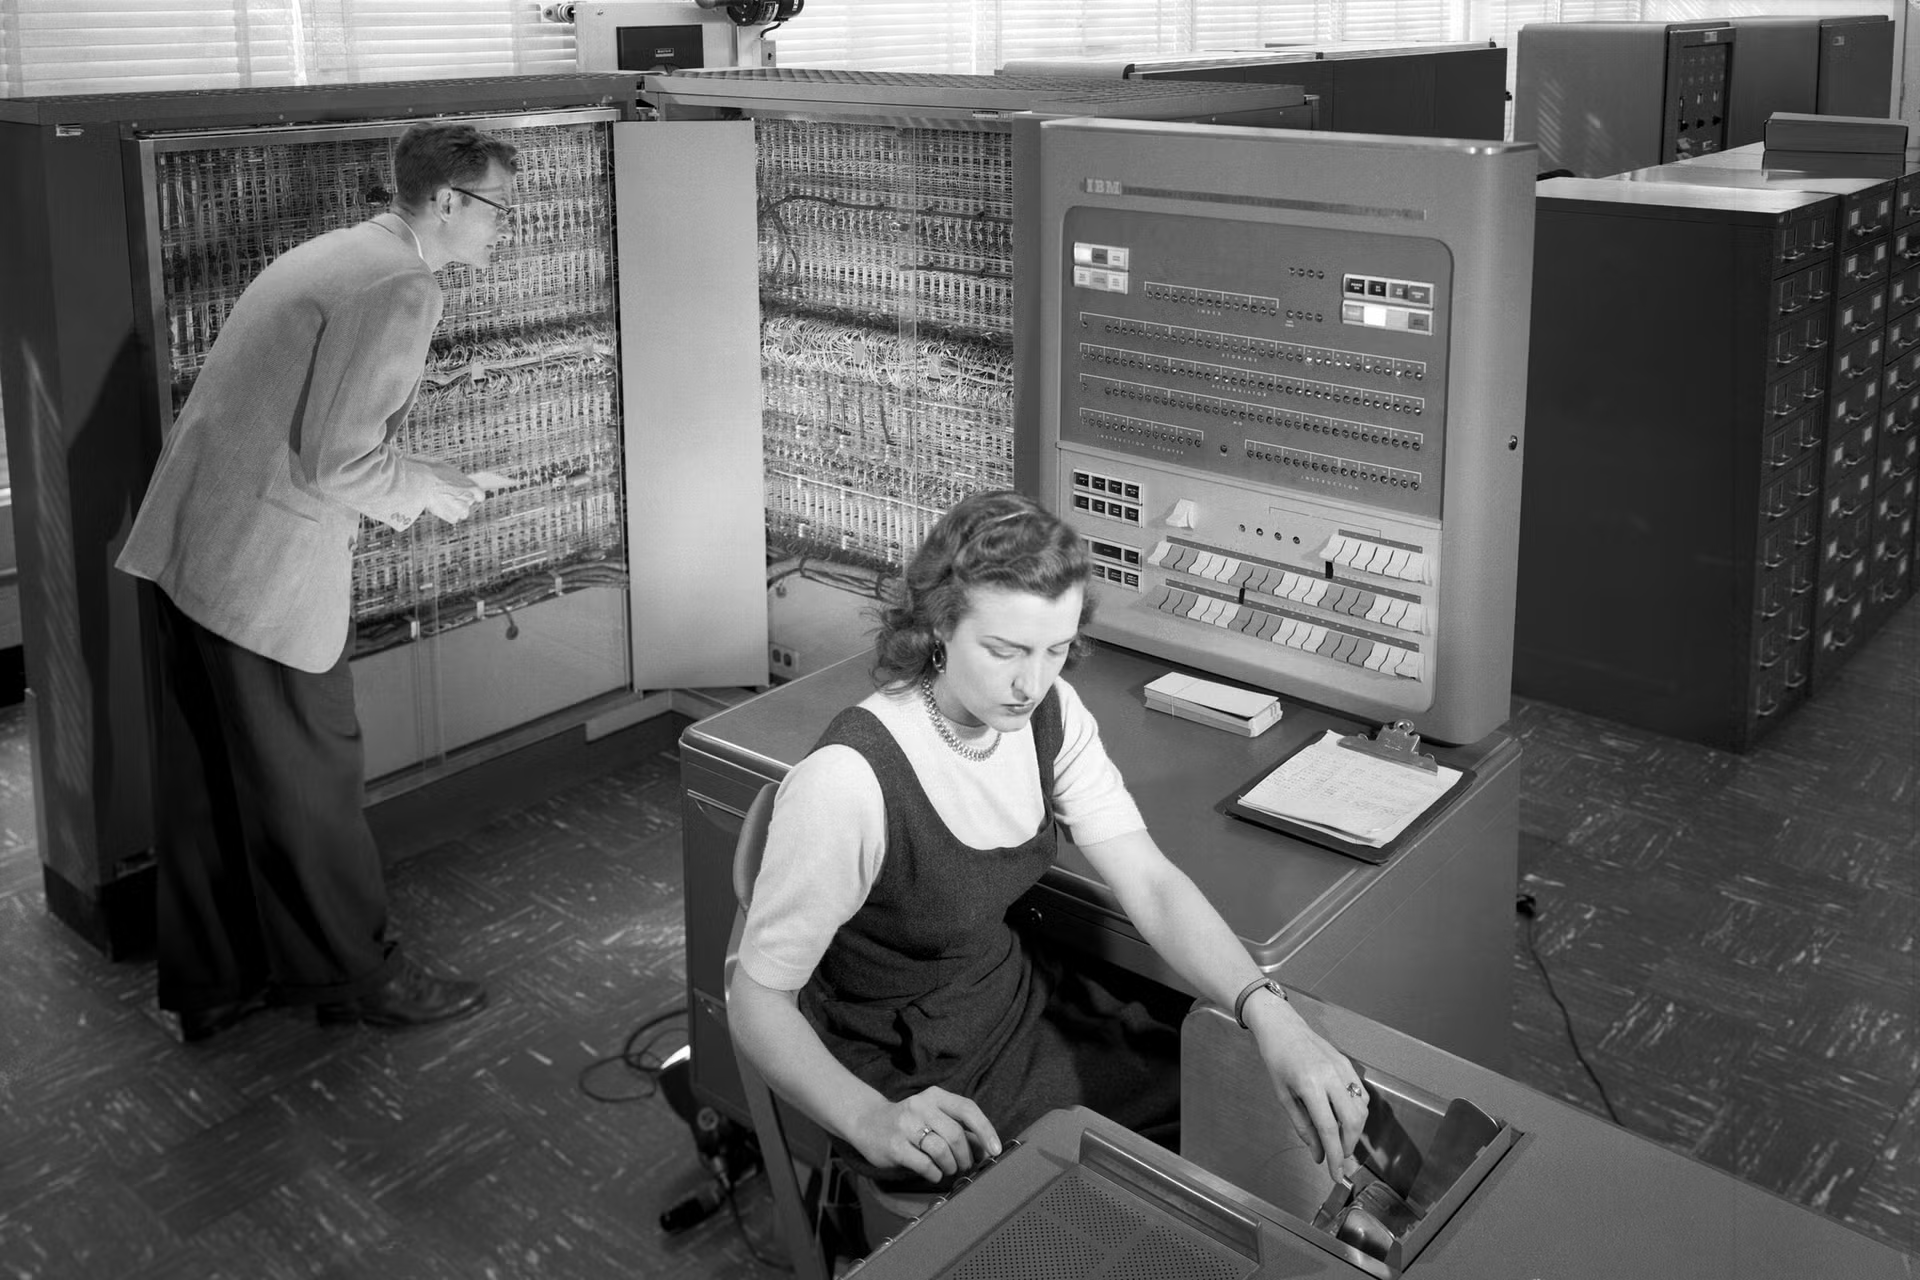 Two professionals operating an early IBM computer system, one working on the database hardware backend while the other inputs data.